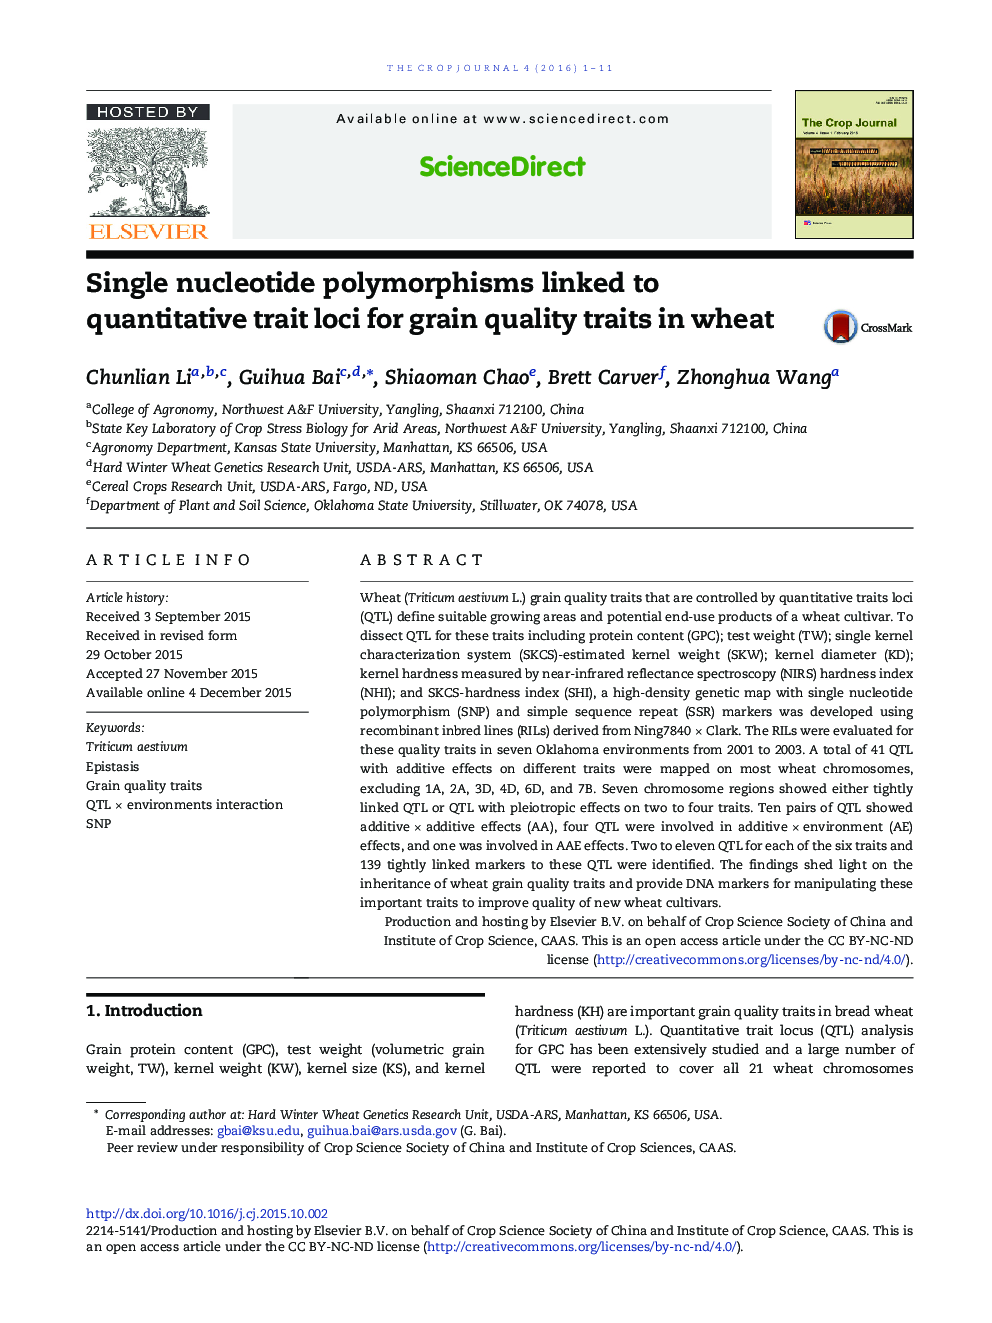 Single nucleotide polymorphisms linked to quantitative trait loci for grain quality traits in wheat 